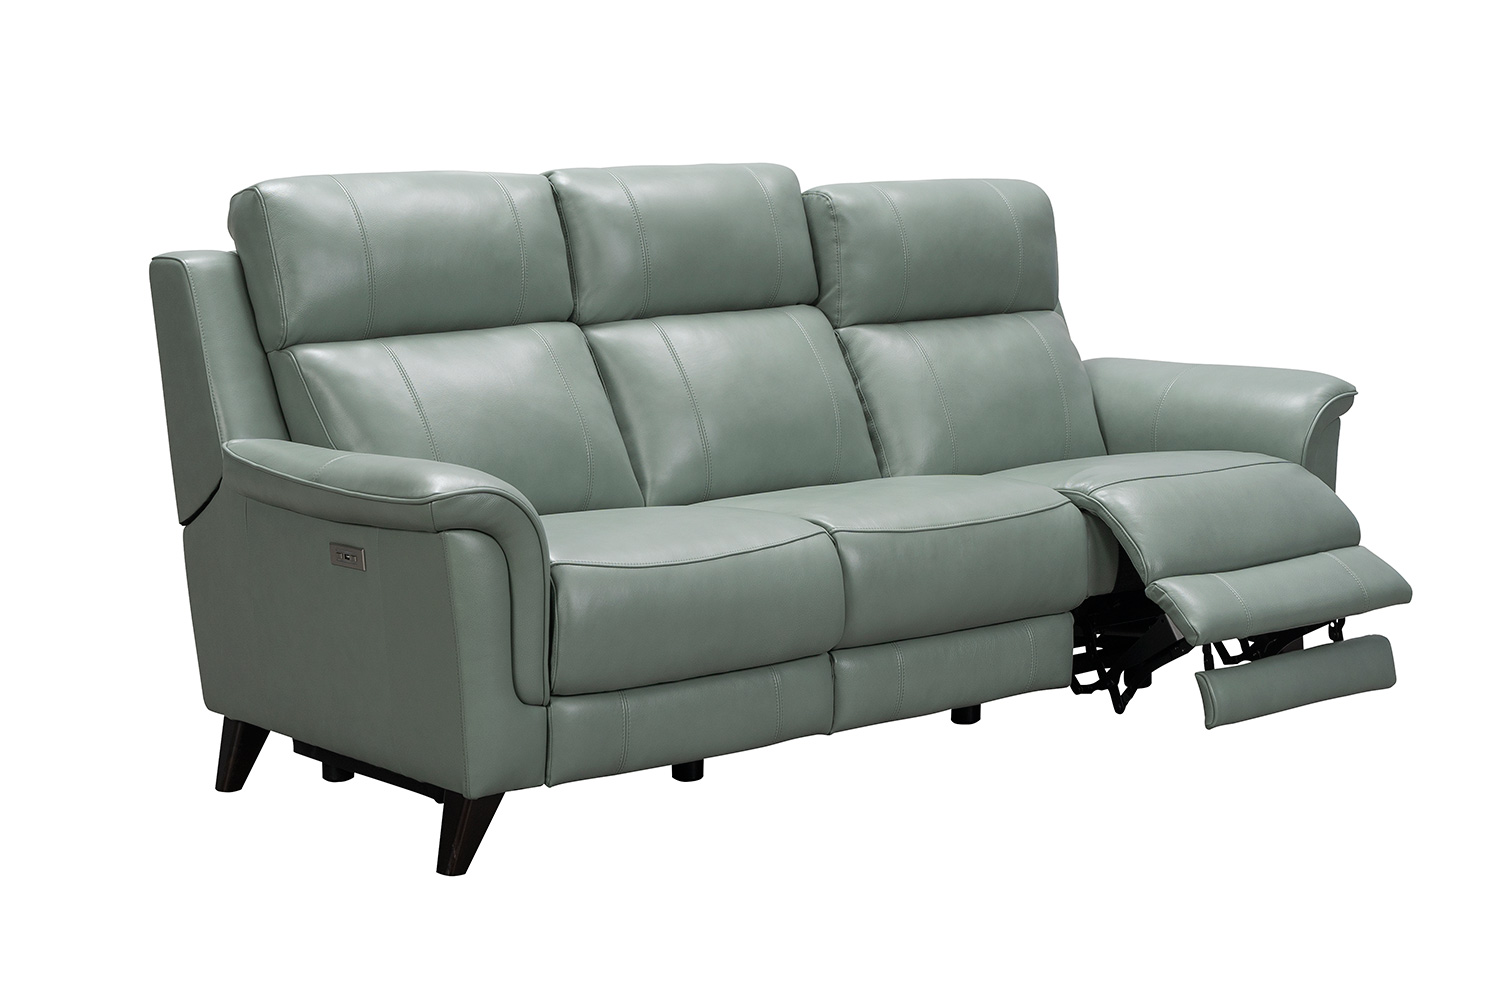 Barcalounger Kester Power Reclining Sofa with Power Head Rests - Lorenzo Mint/Leather match